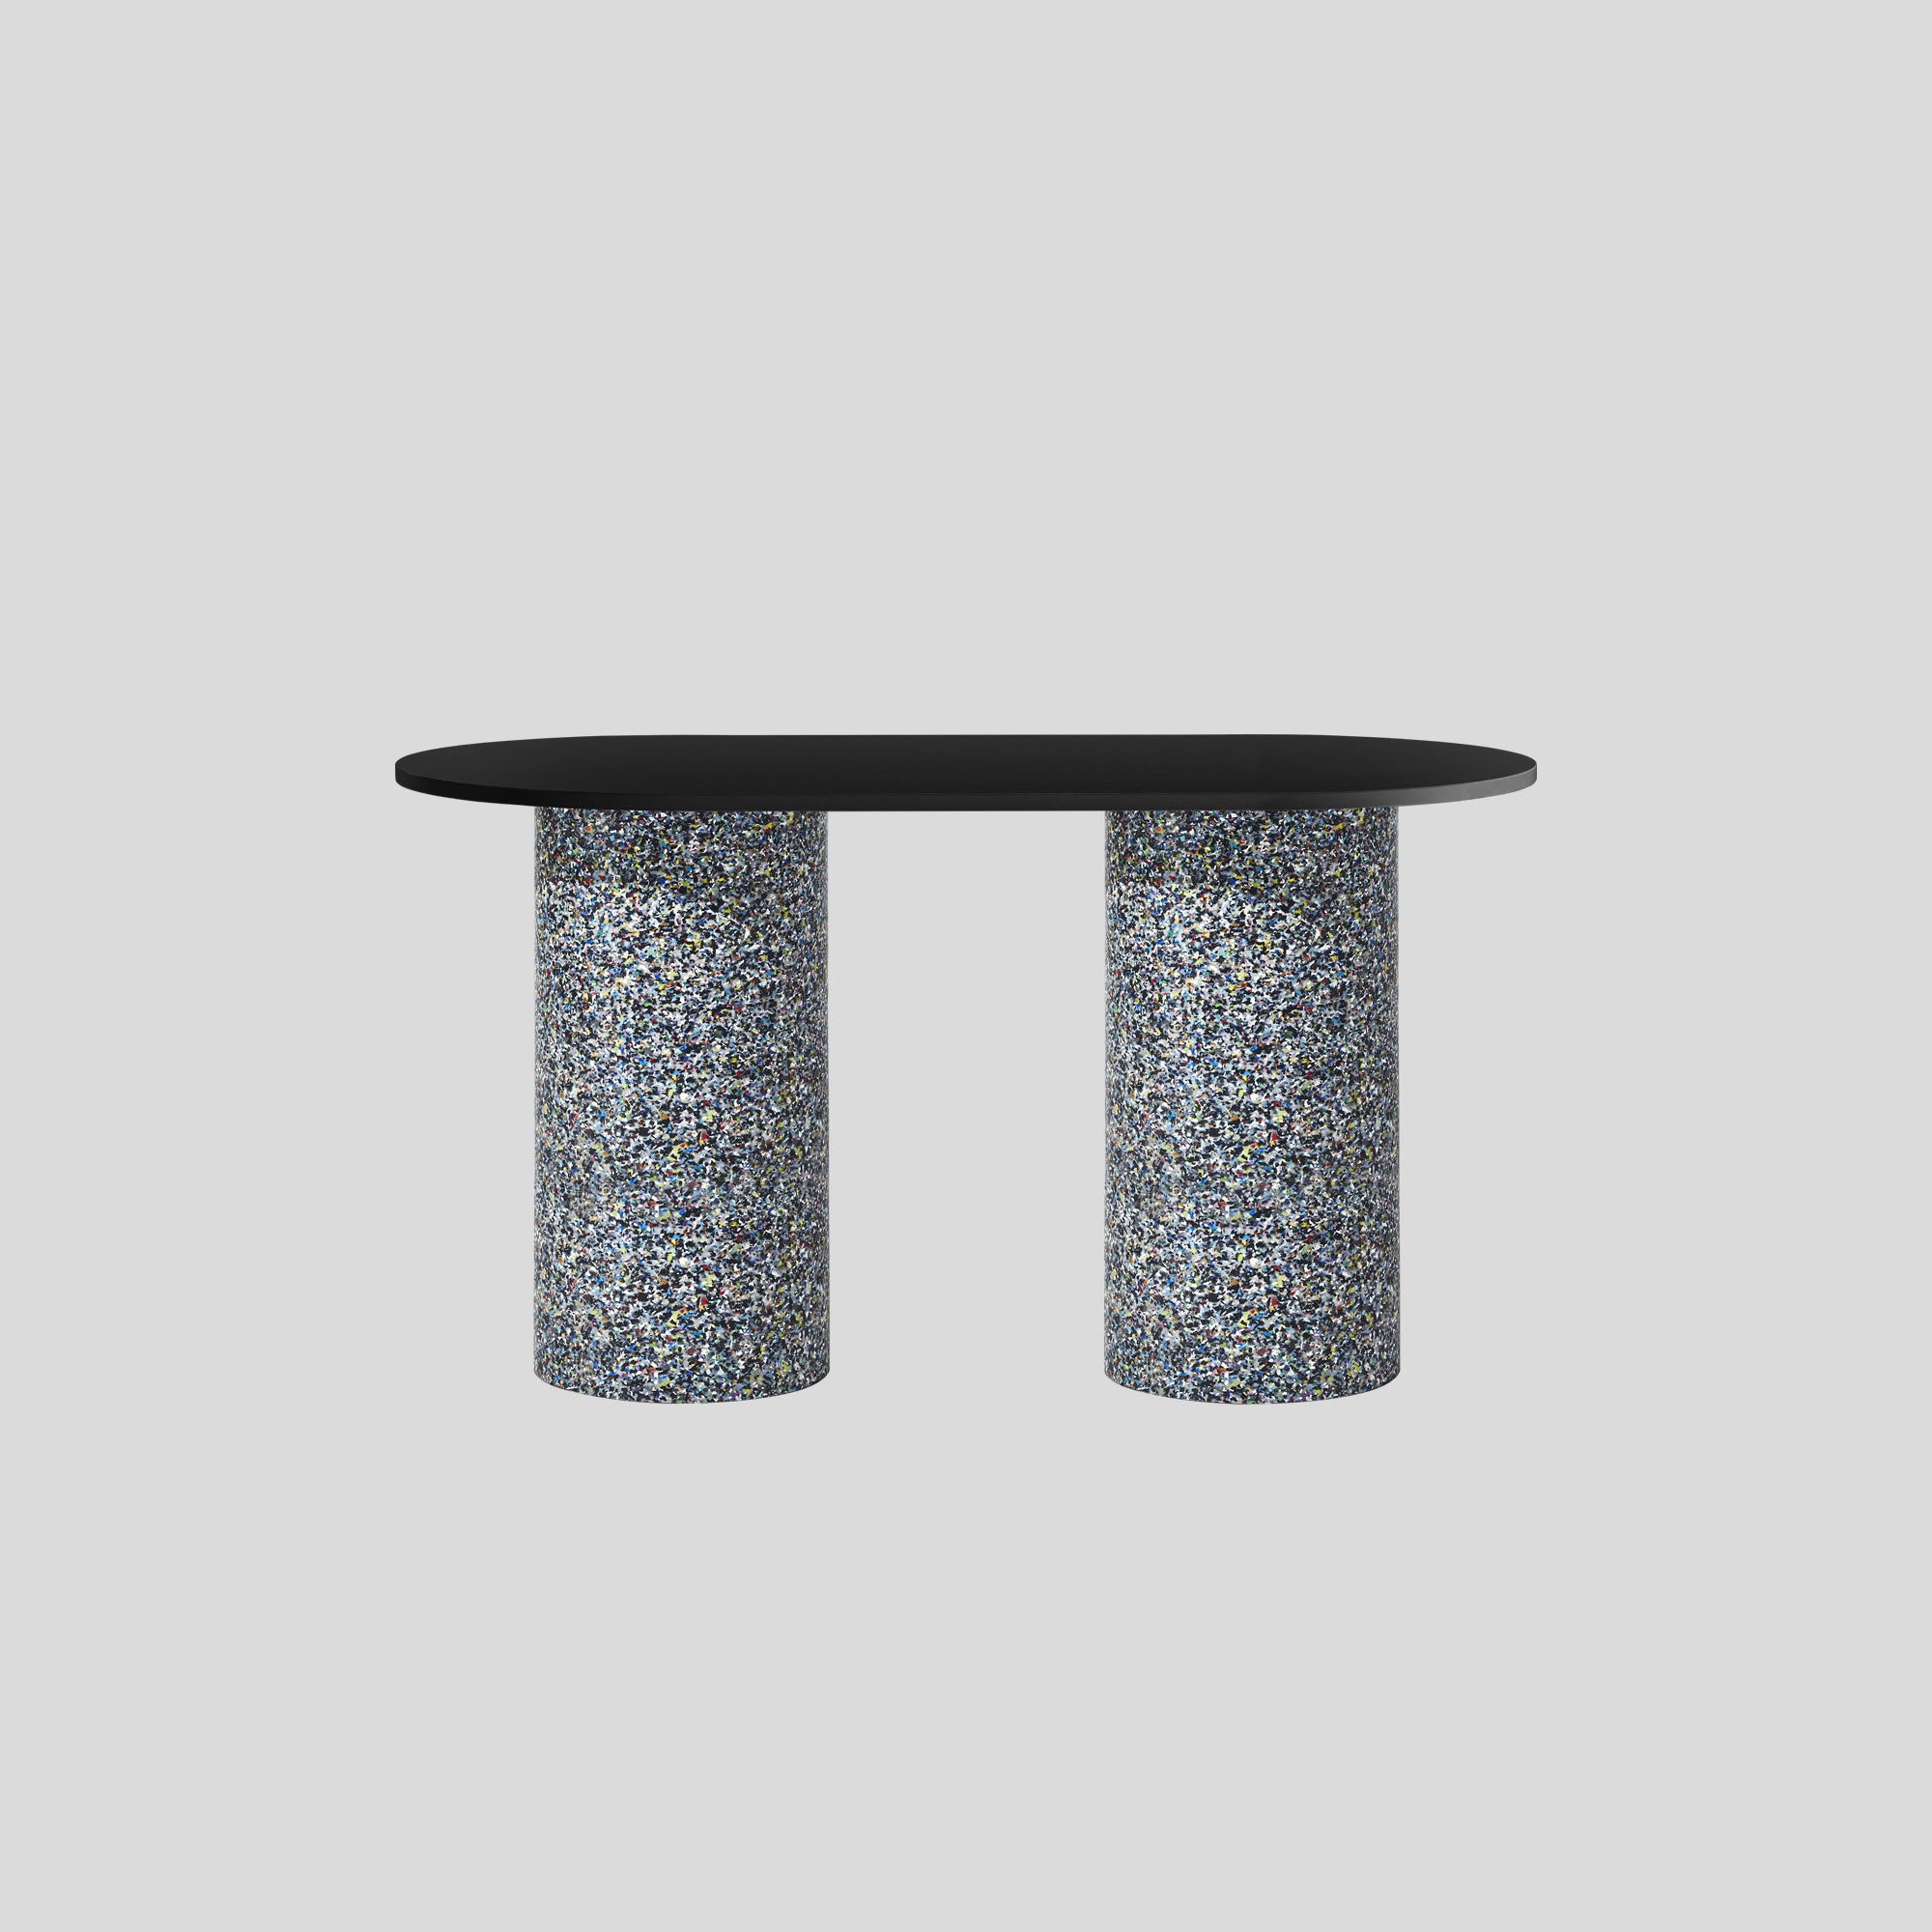 Confetti Pill Bar Table | 100% recycled plastic base | Timber & Laminate Tops | Indoor Outdoor Use | Gibson Karlo | DesignByThem